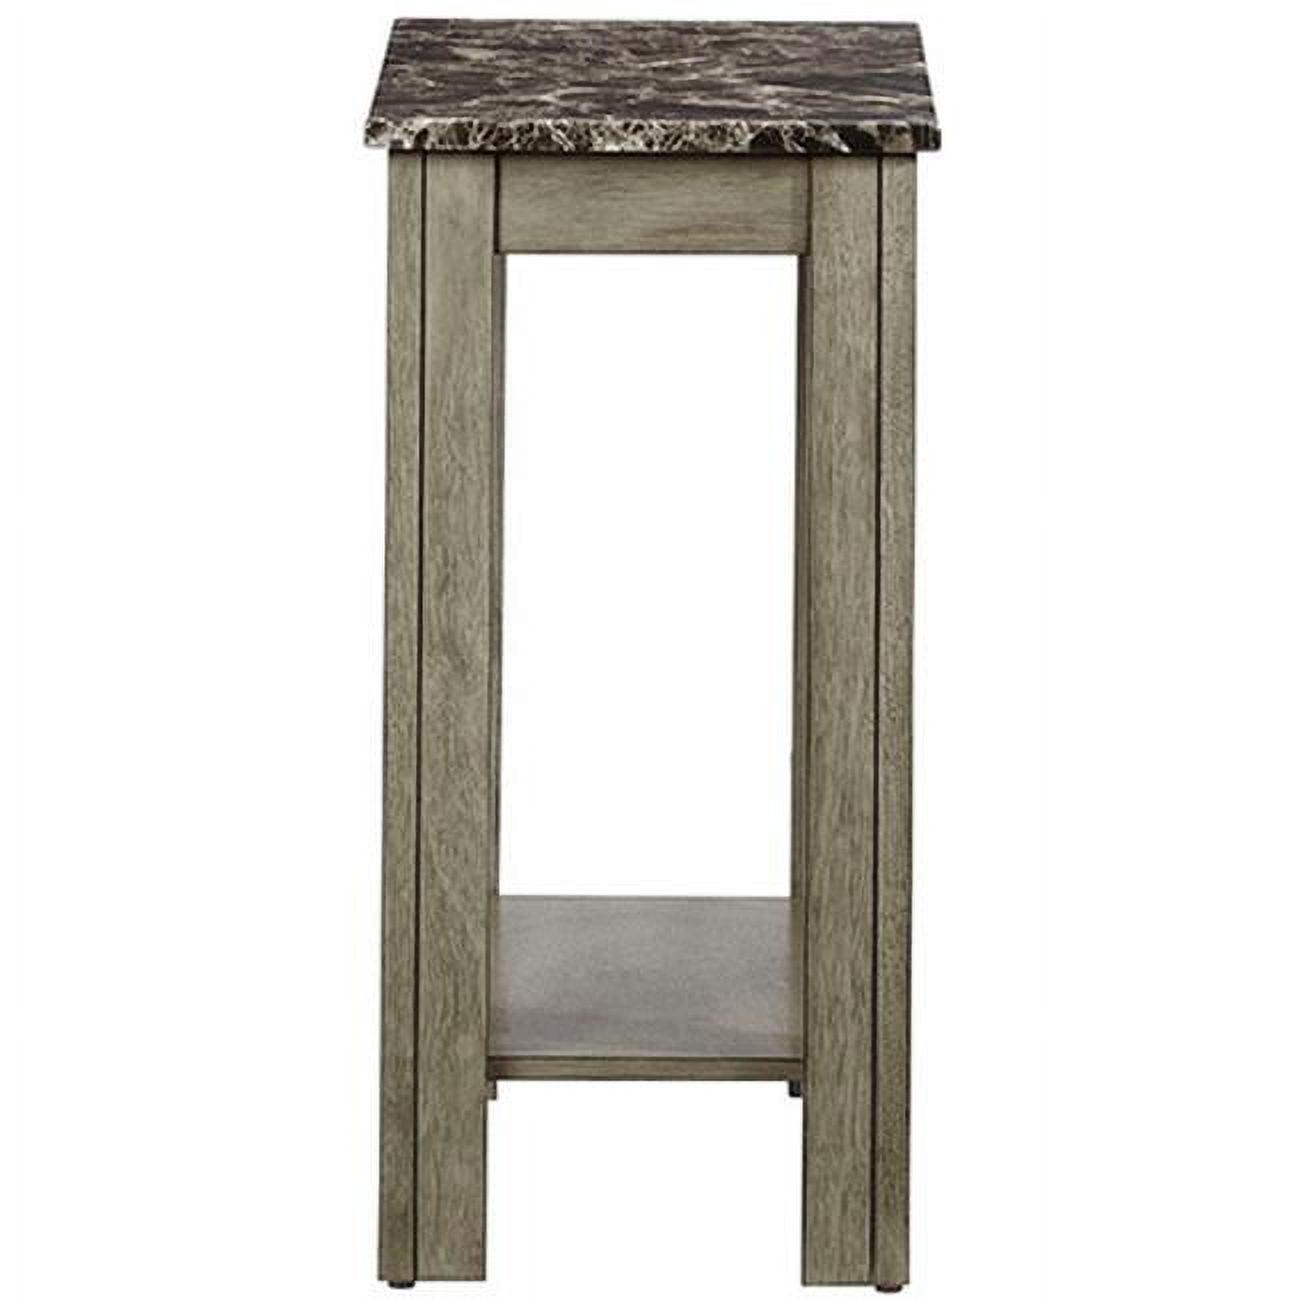 Transitional White Stone and Wood Chairside Table with Storage